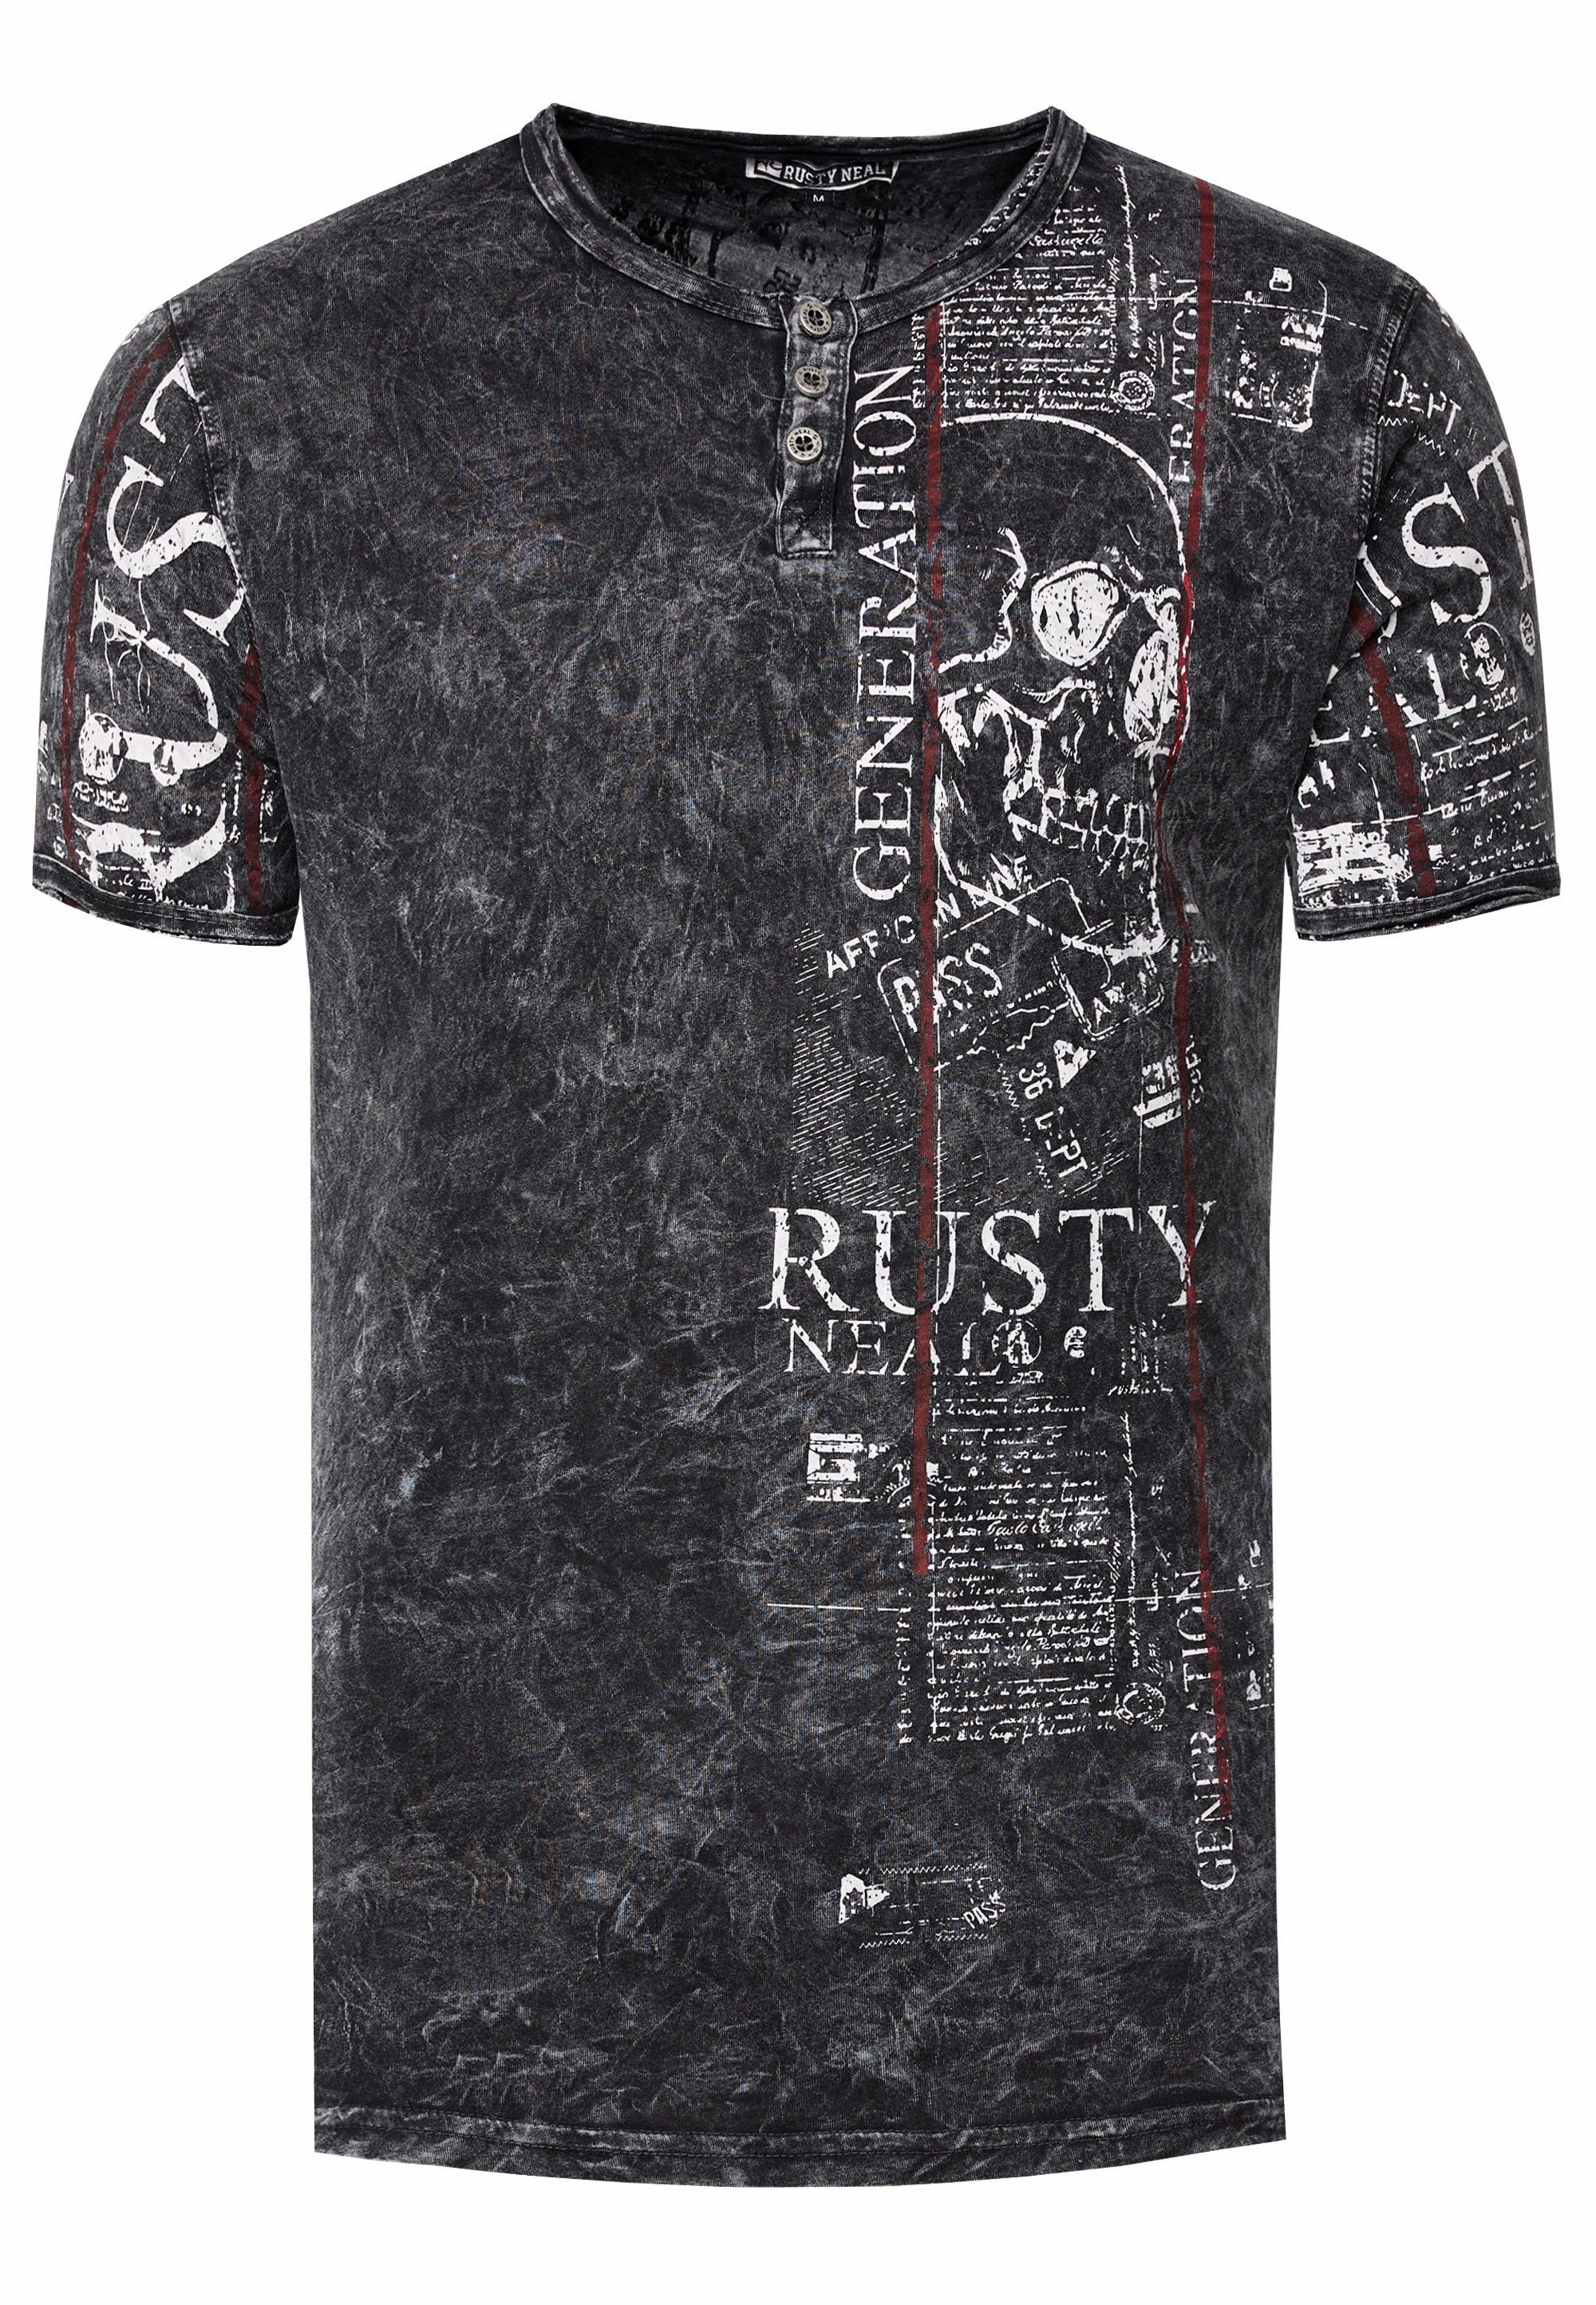 T-Shirt anthrazit mit Rusty Used-Look im Allover-Print Neal